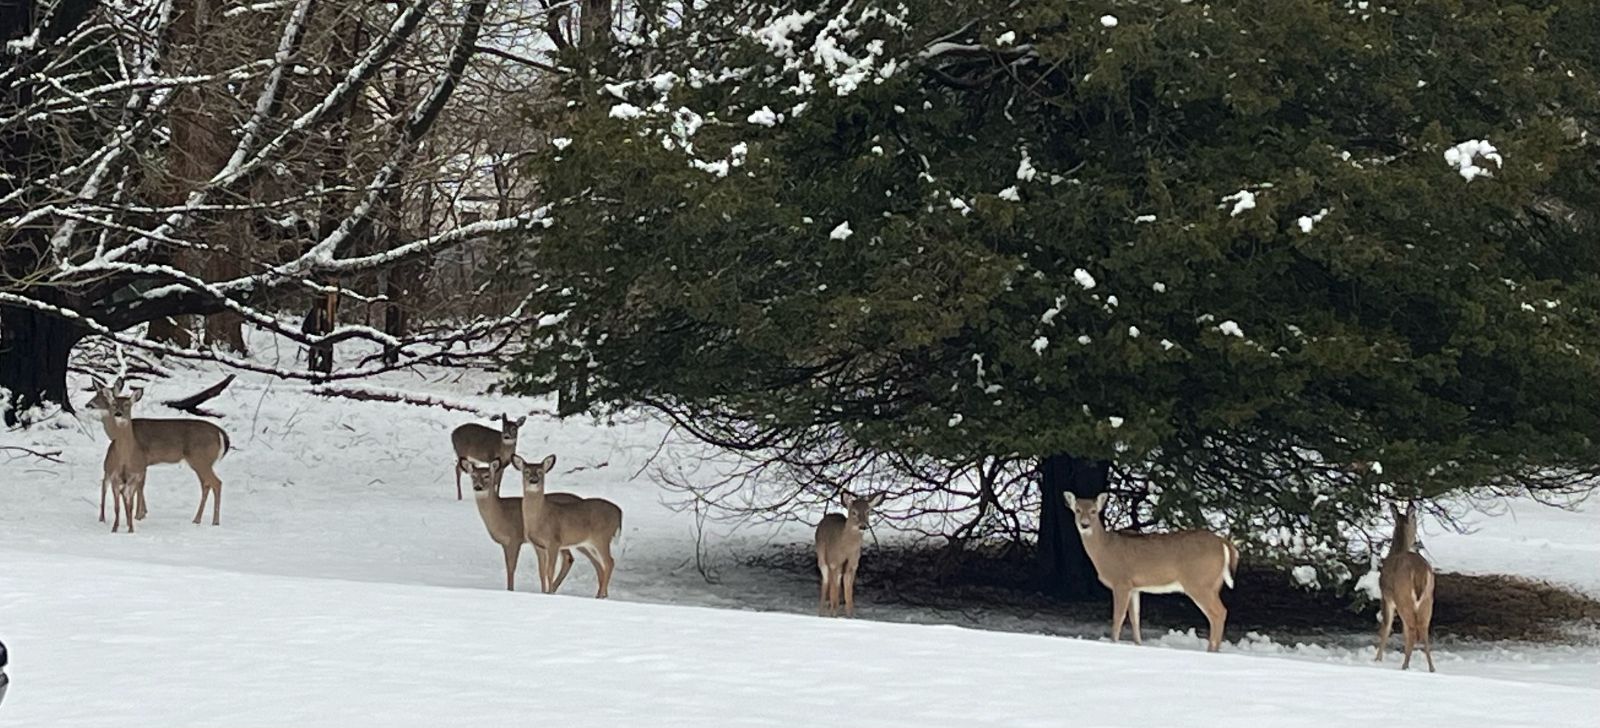 Tuesday was a snow day on the East End - deer in snow